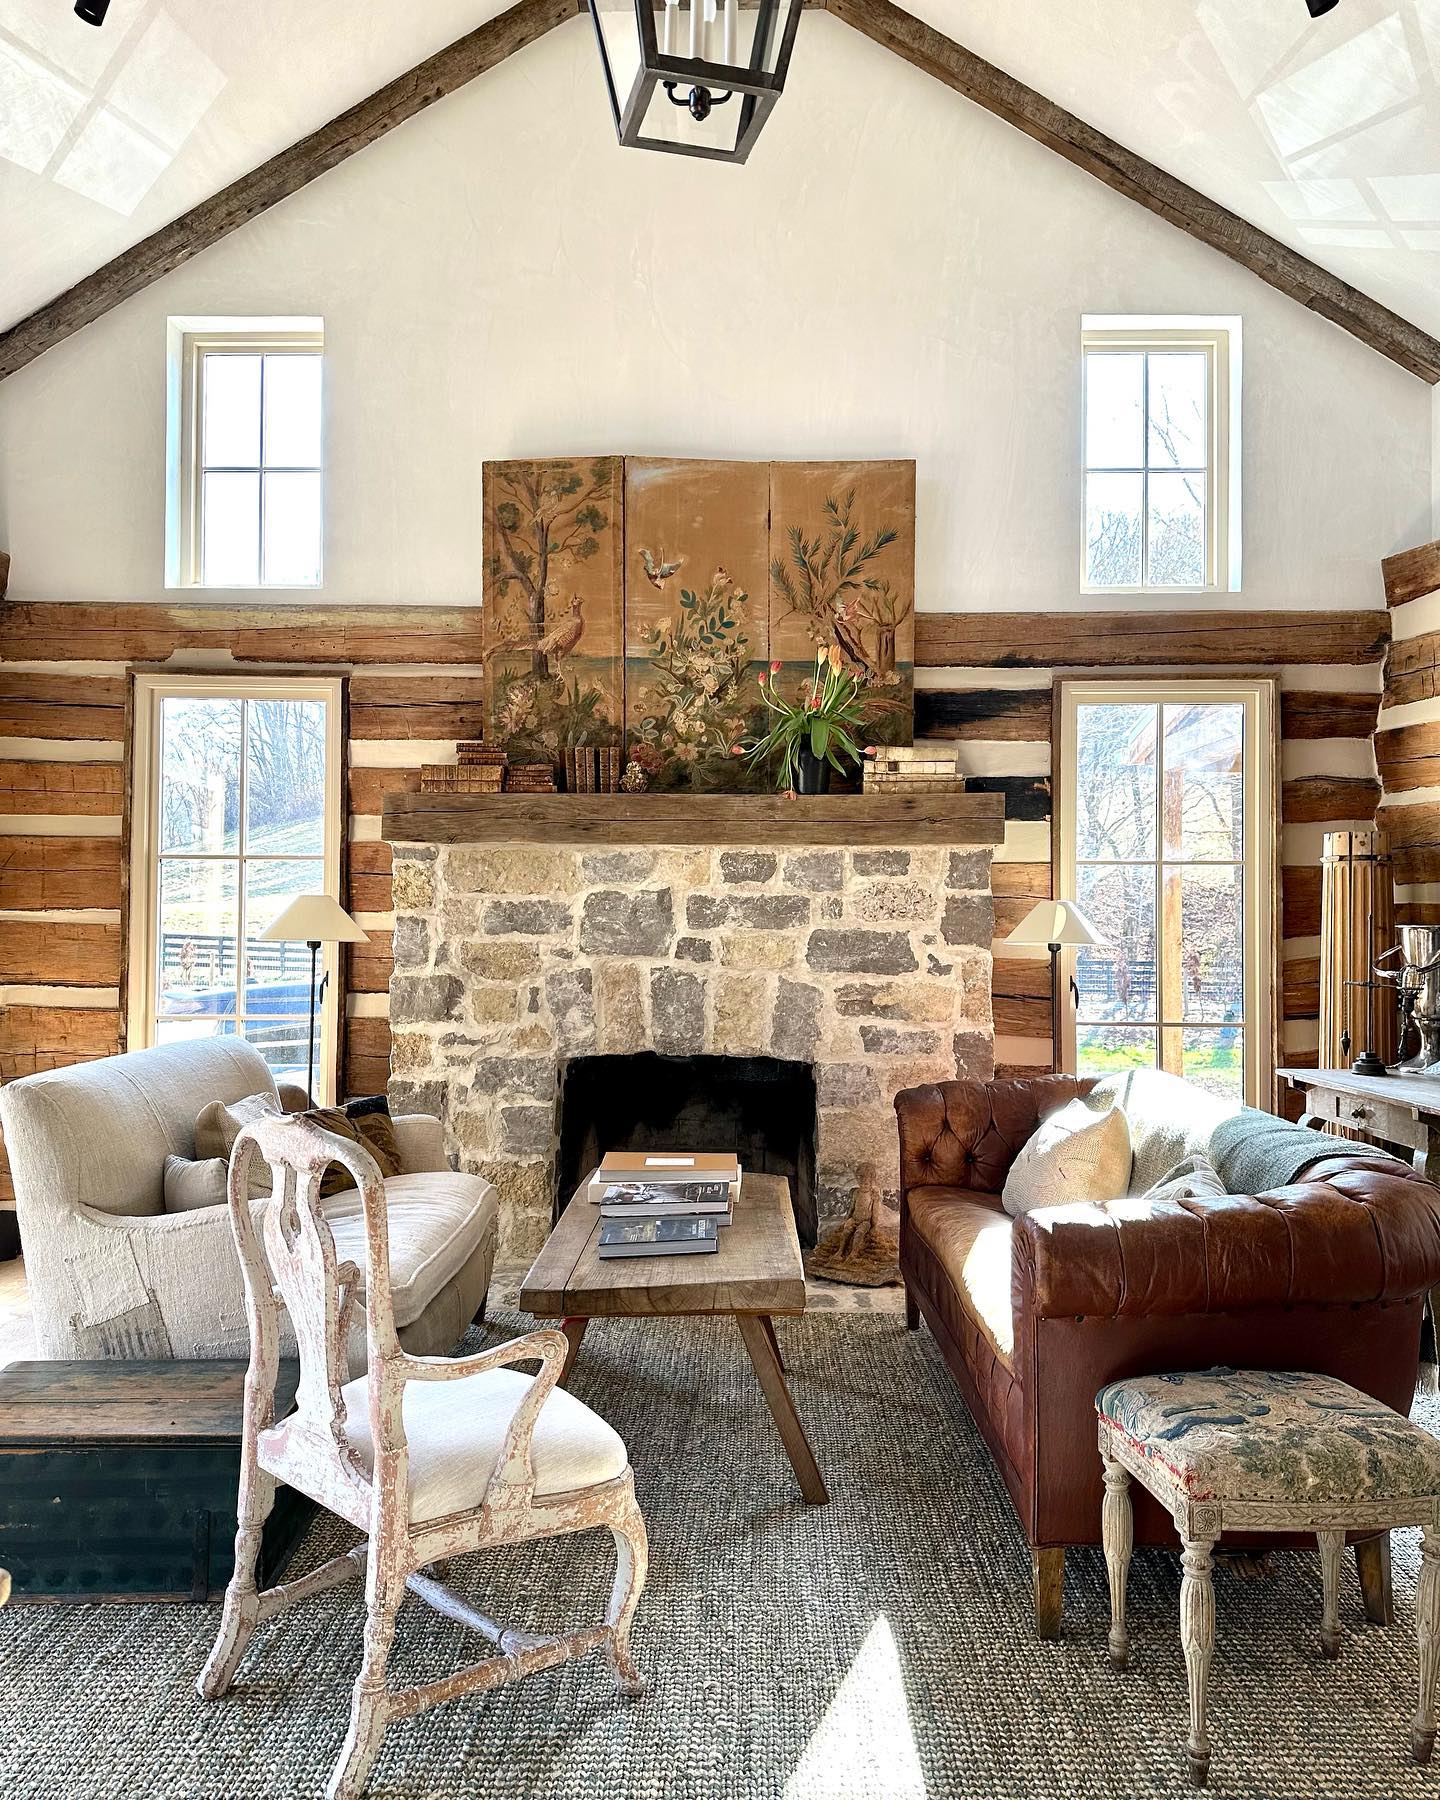 Beautiful log cabin interior in Leiper's Fork, Tennessee by Brooke and Steve Giannetti of Patina Home & Garden.